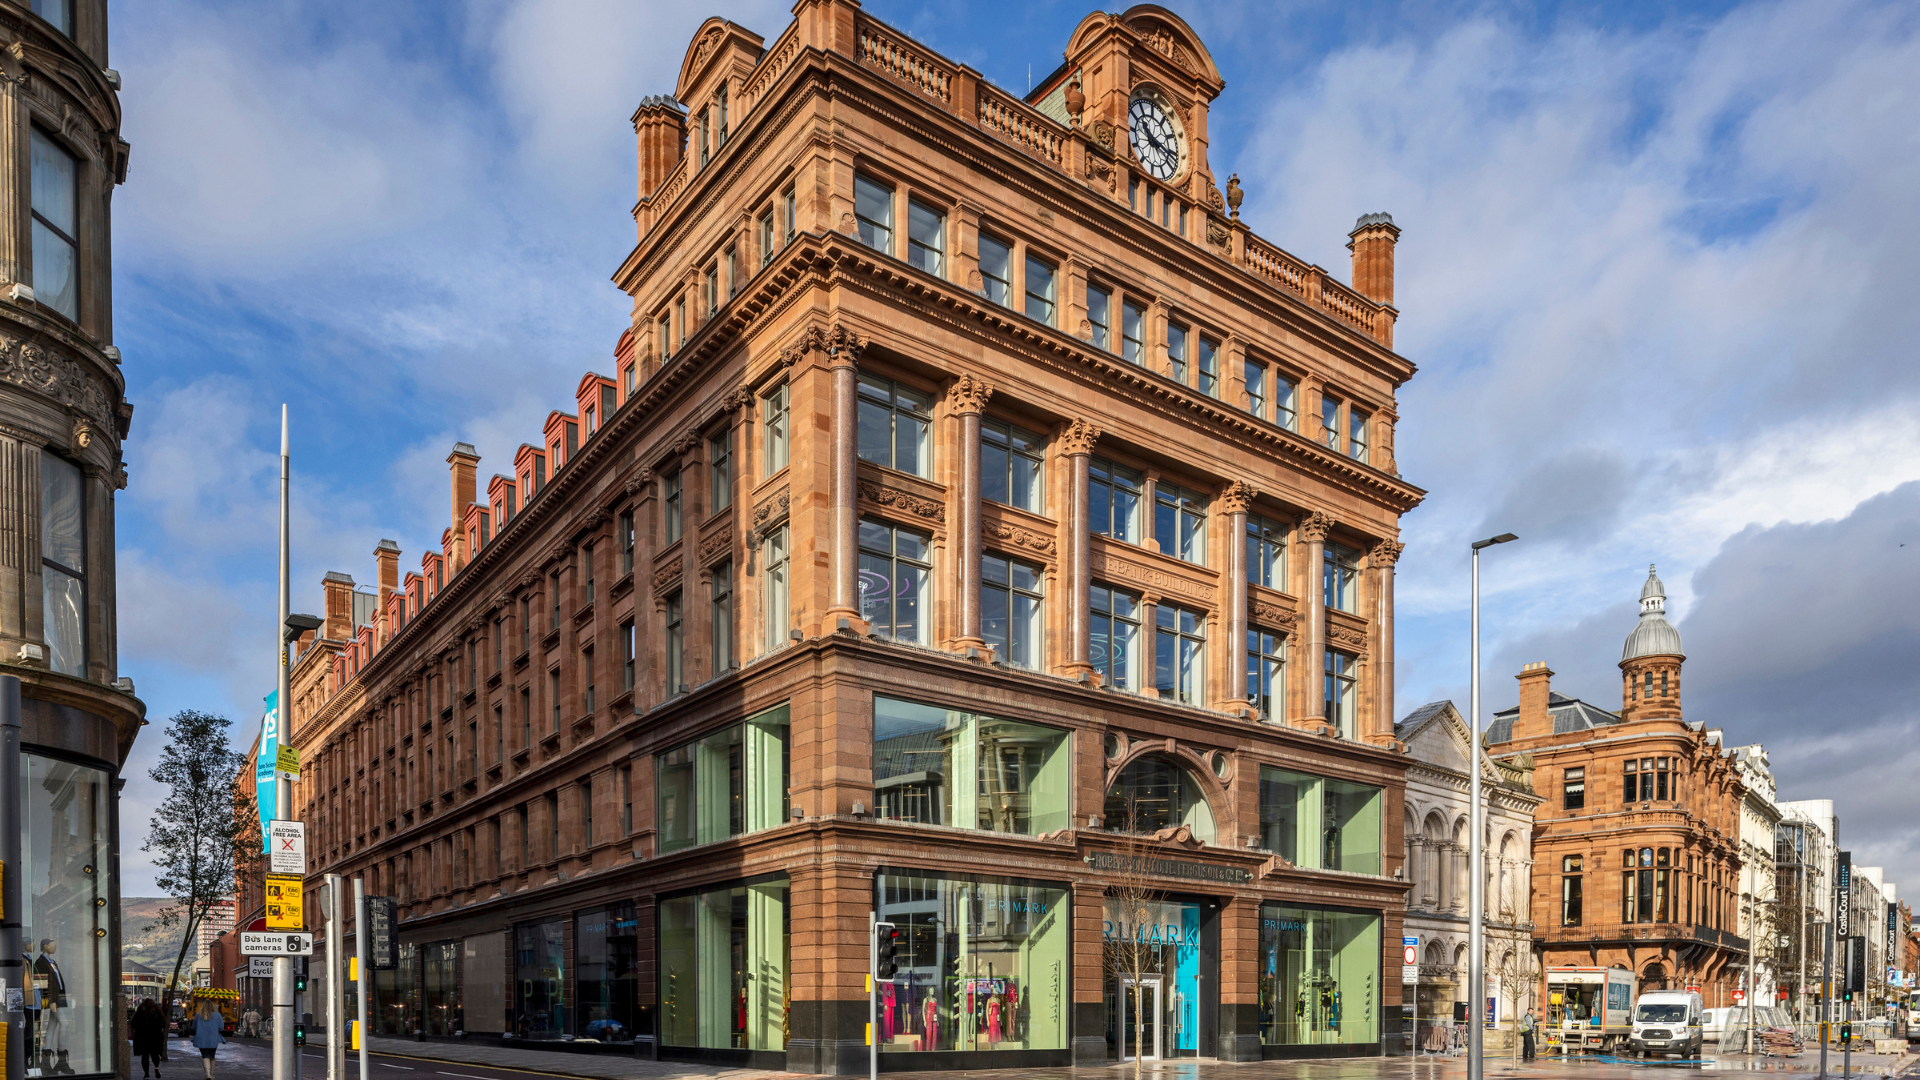 Bank Primark Buildings secures two Awards